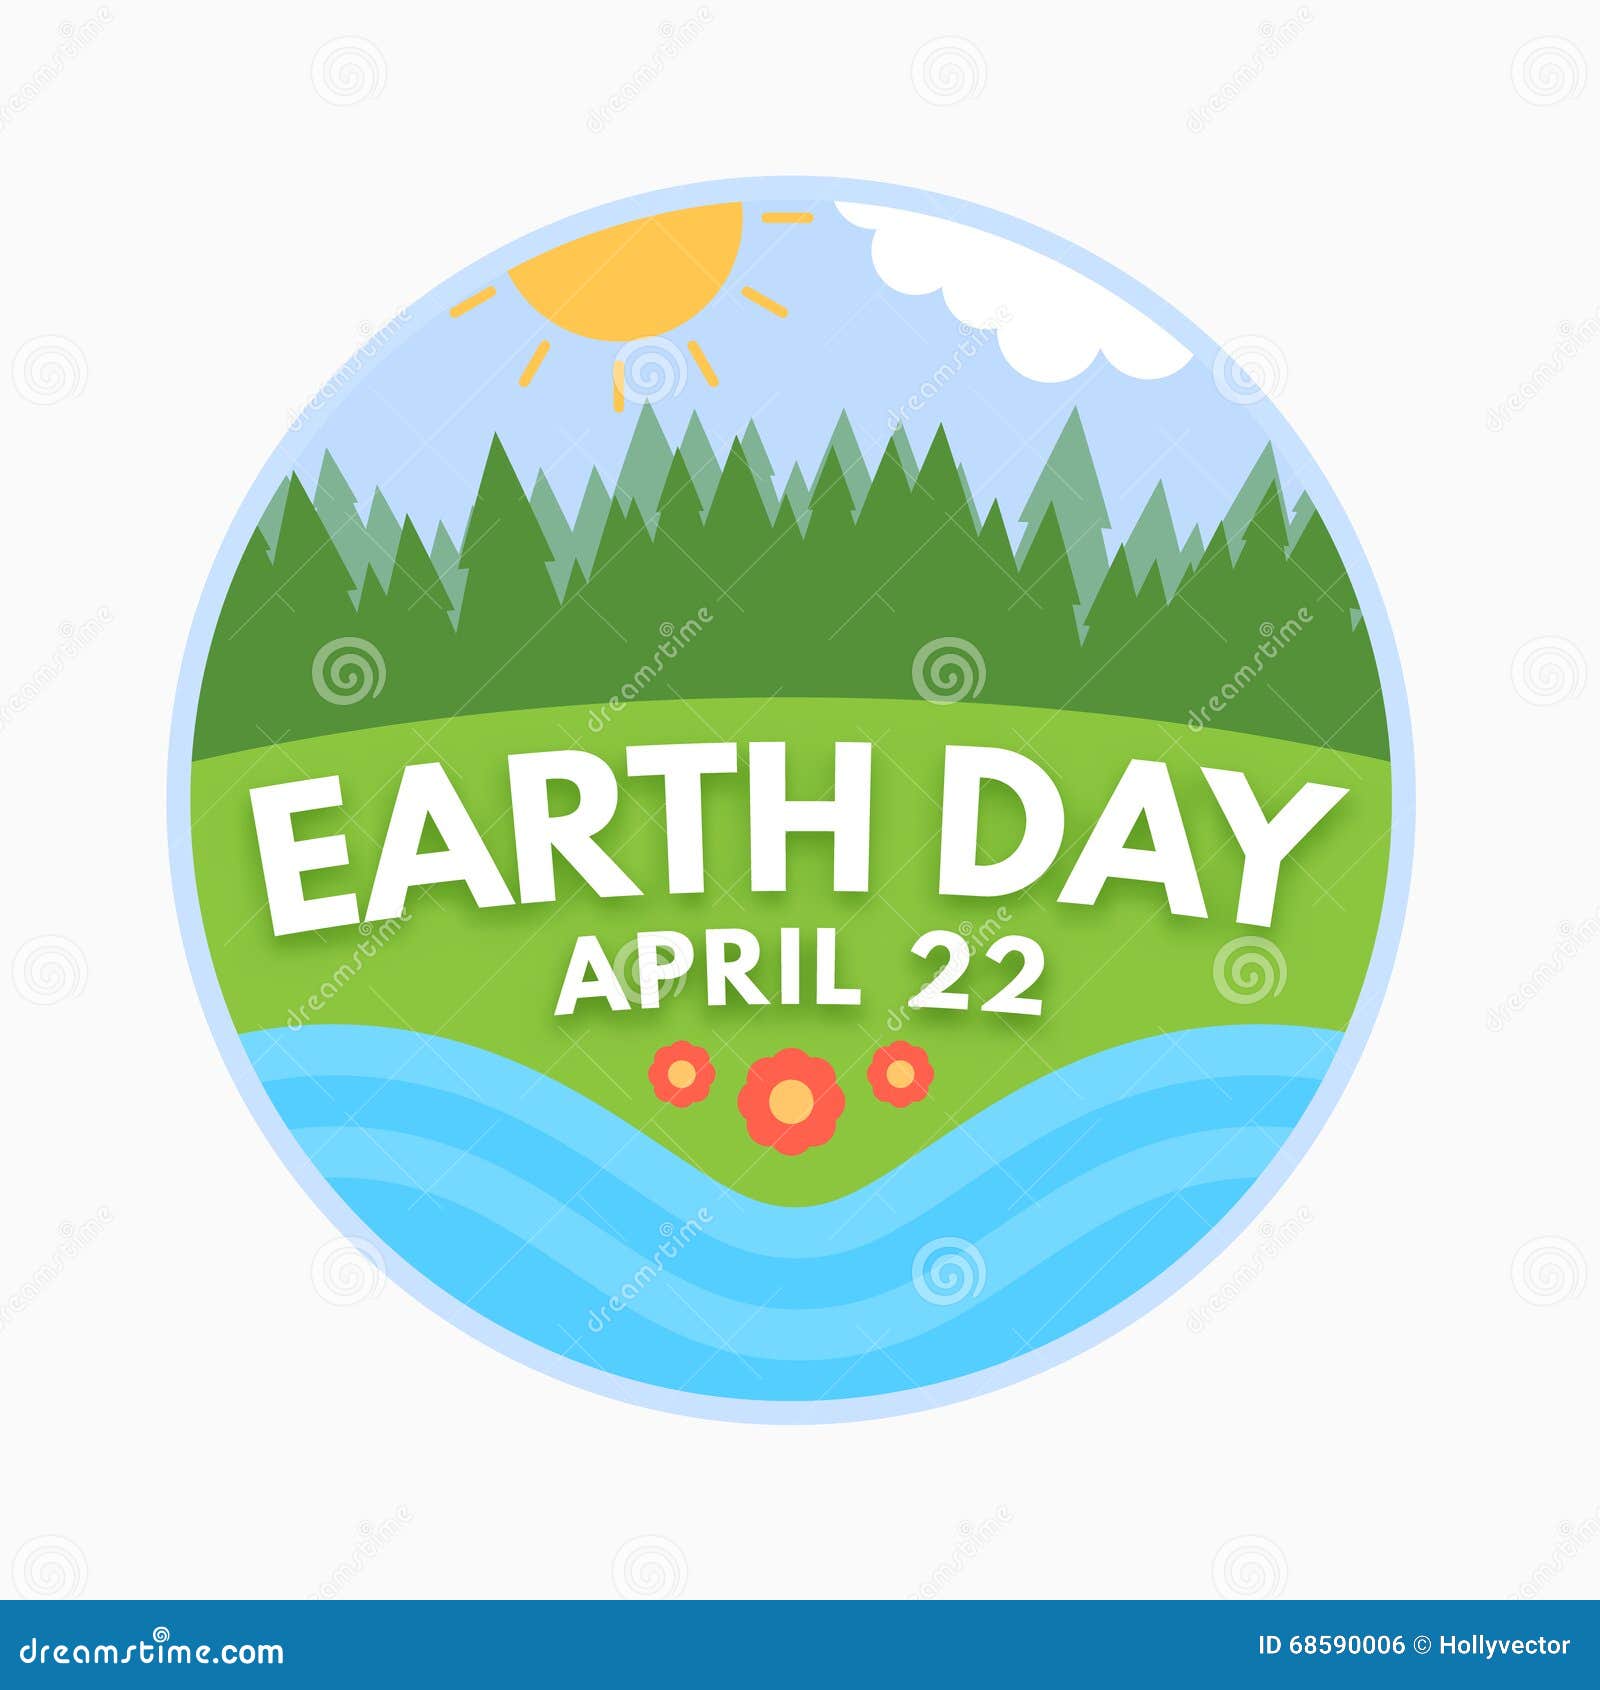 free clipart earth day april 22 - photo #12